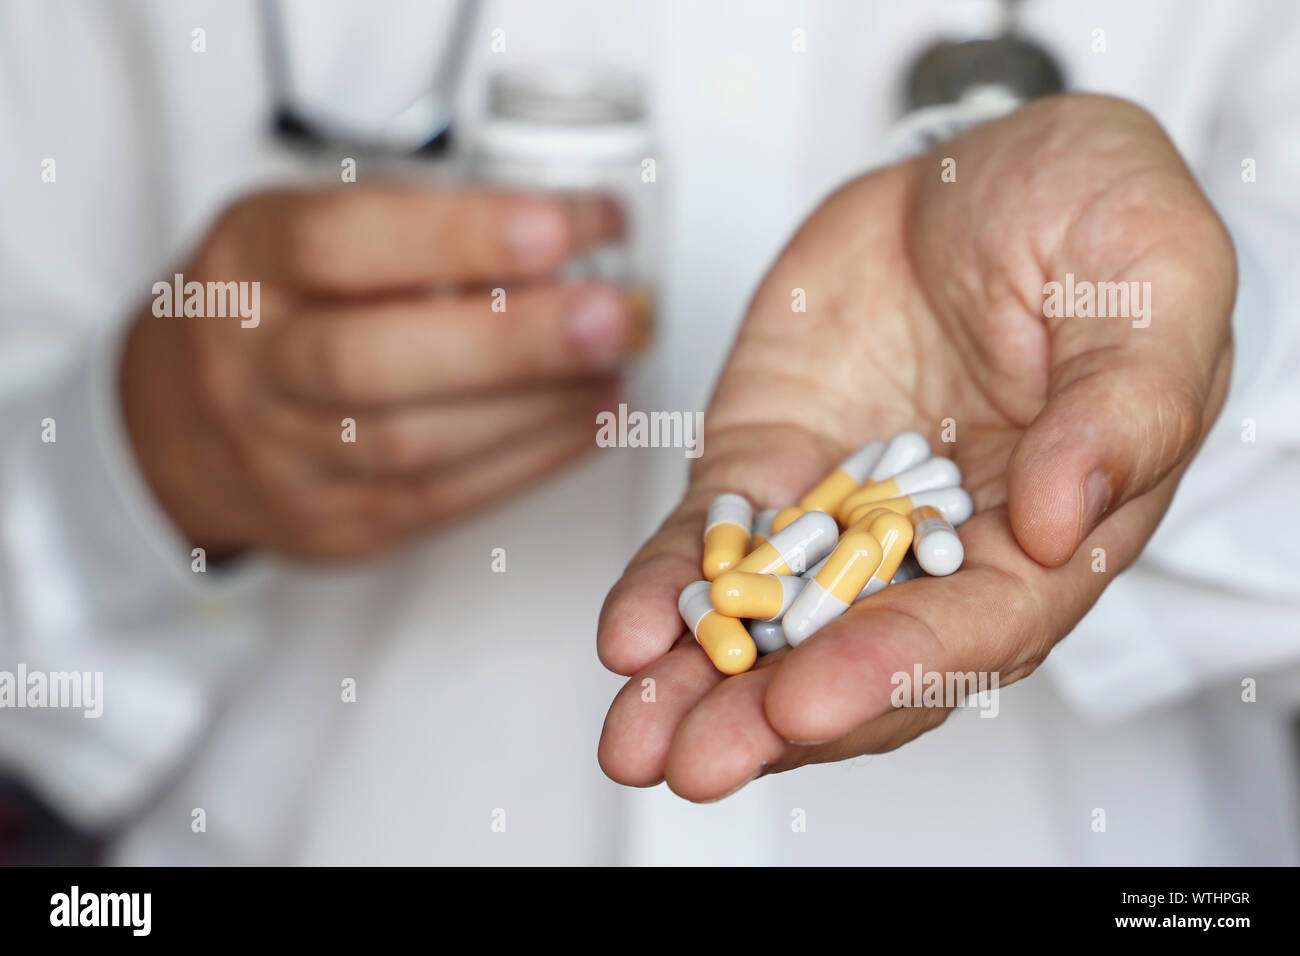 Doctor giving pills, physician holding in palm of hand medication in capsules. Concept of dose of drugs during cold season, vitamins, medical exam Stock Photo